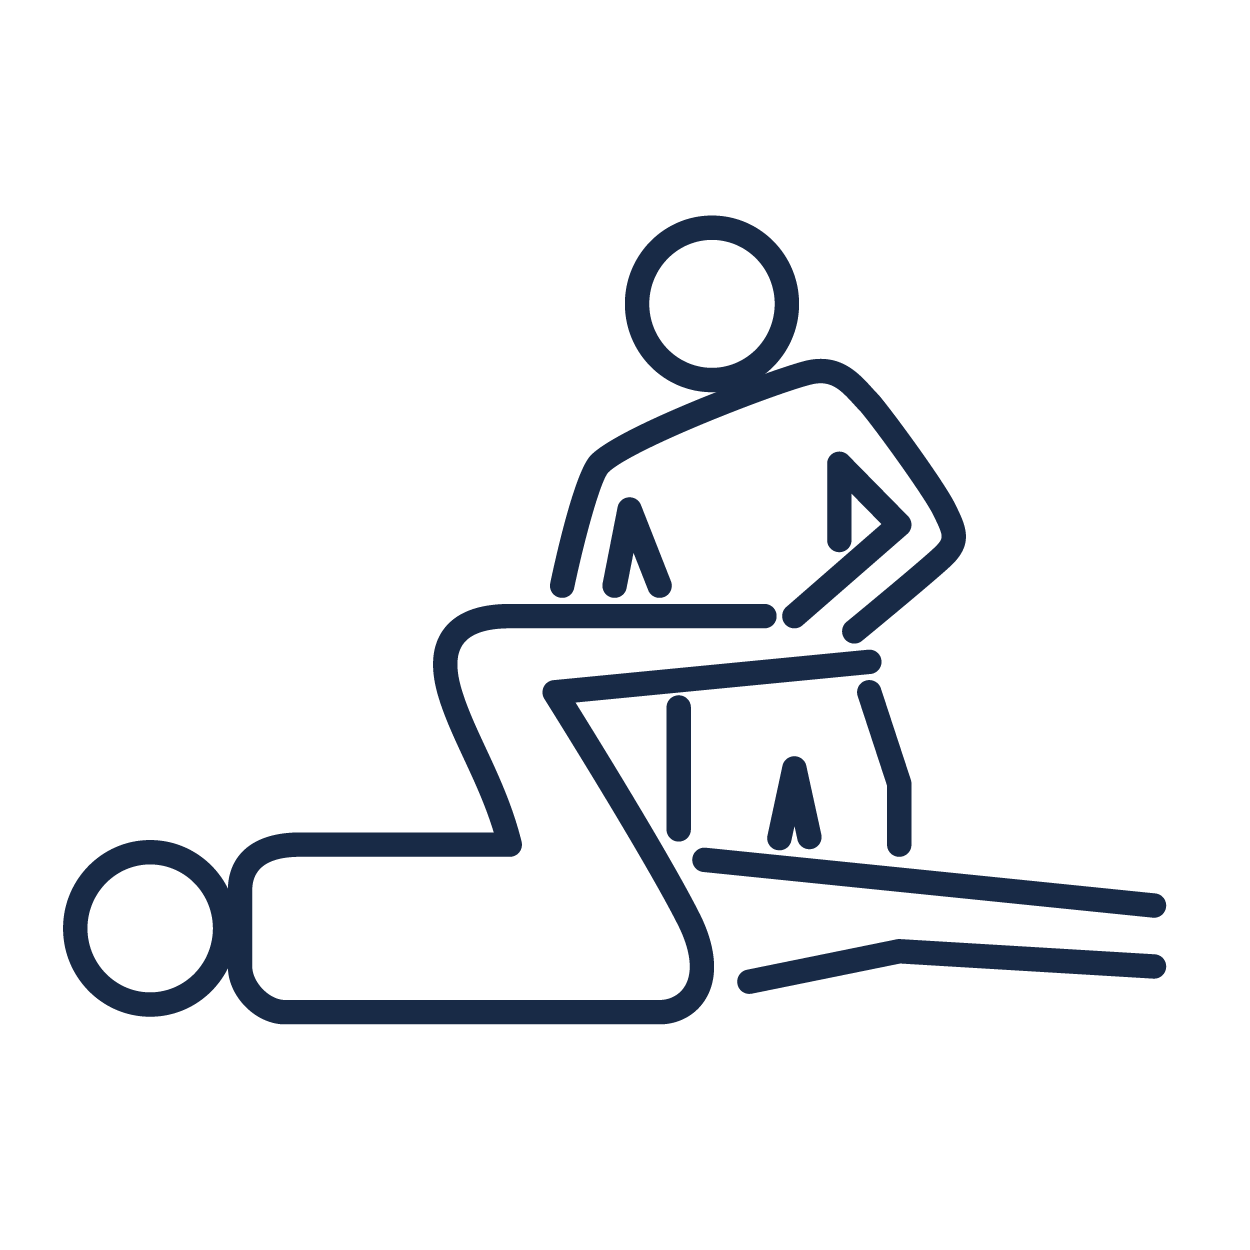 icon showing chiropractic patient and clinician